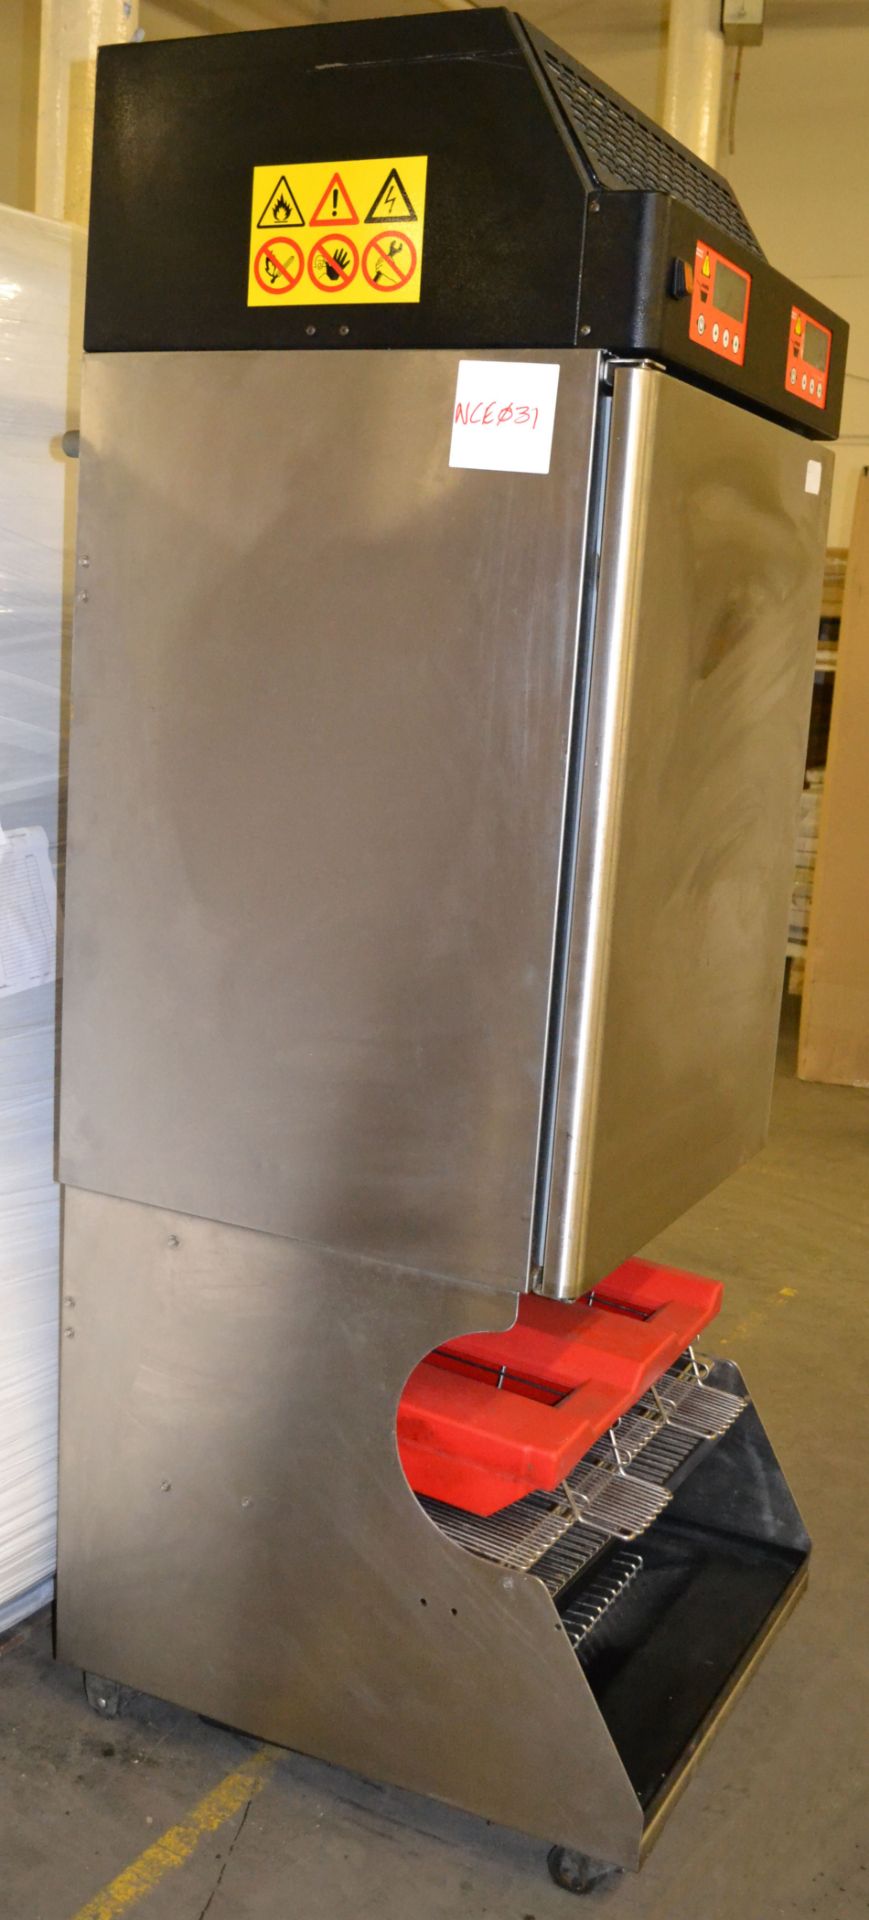 1 x Franke F3D3 Frozen Product Dispenser - Ref:NCE031 - CL007 - Location: Bolton BL1Approximate - Image 4 of 16